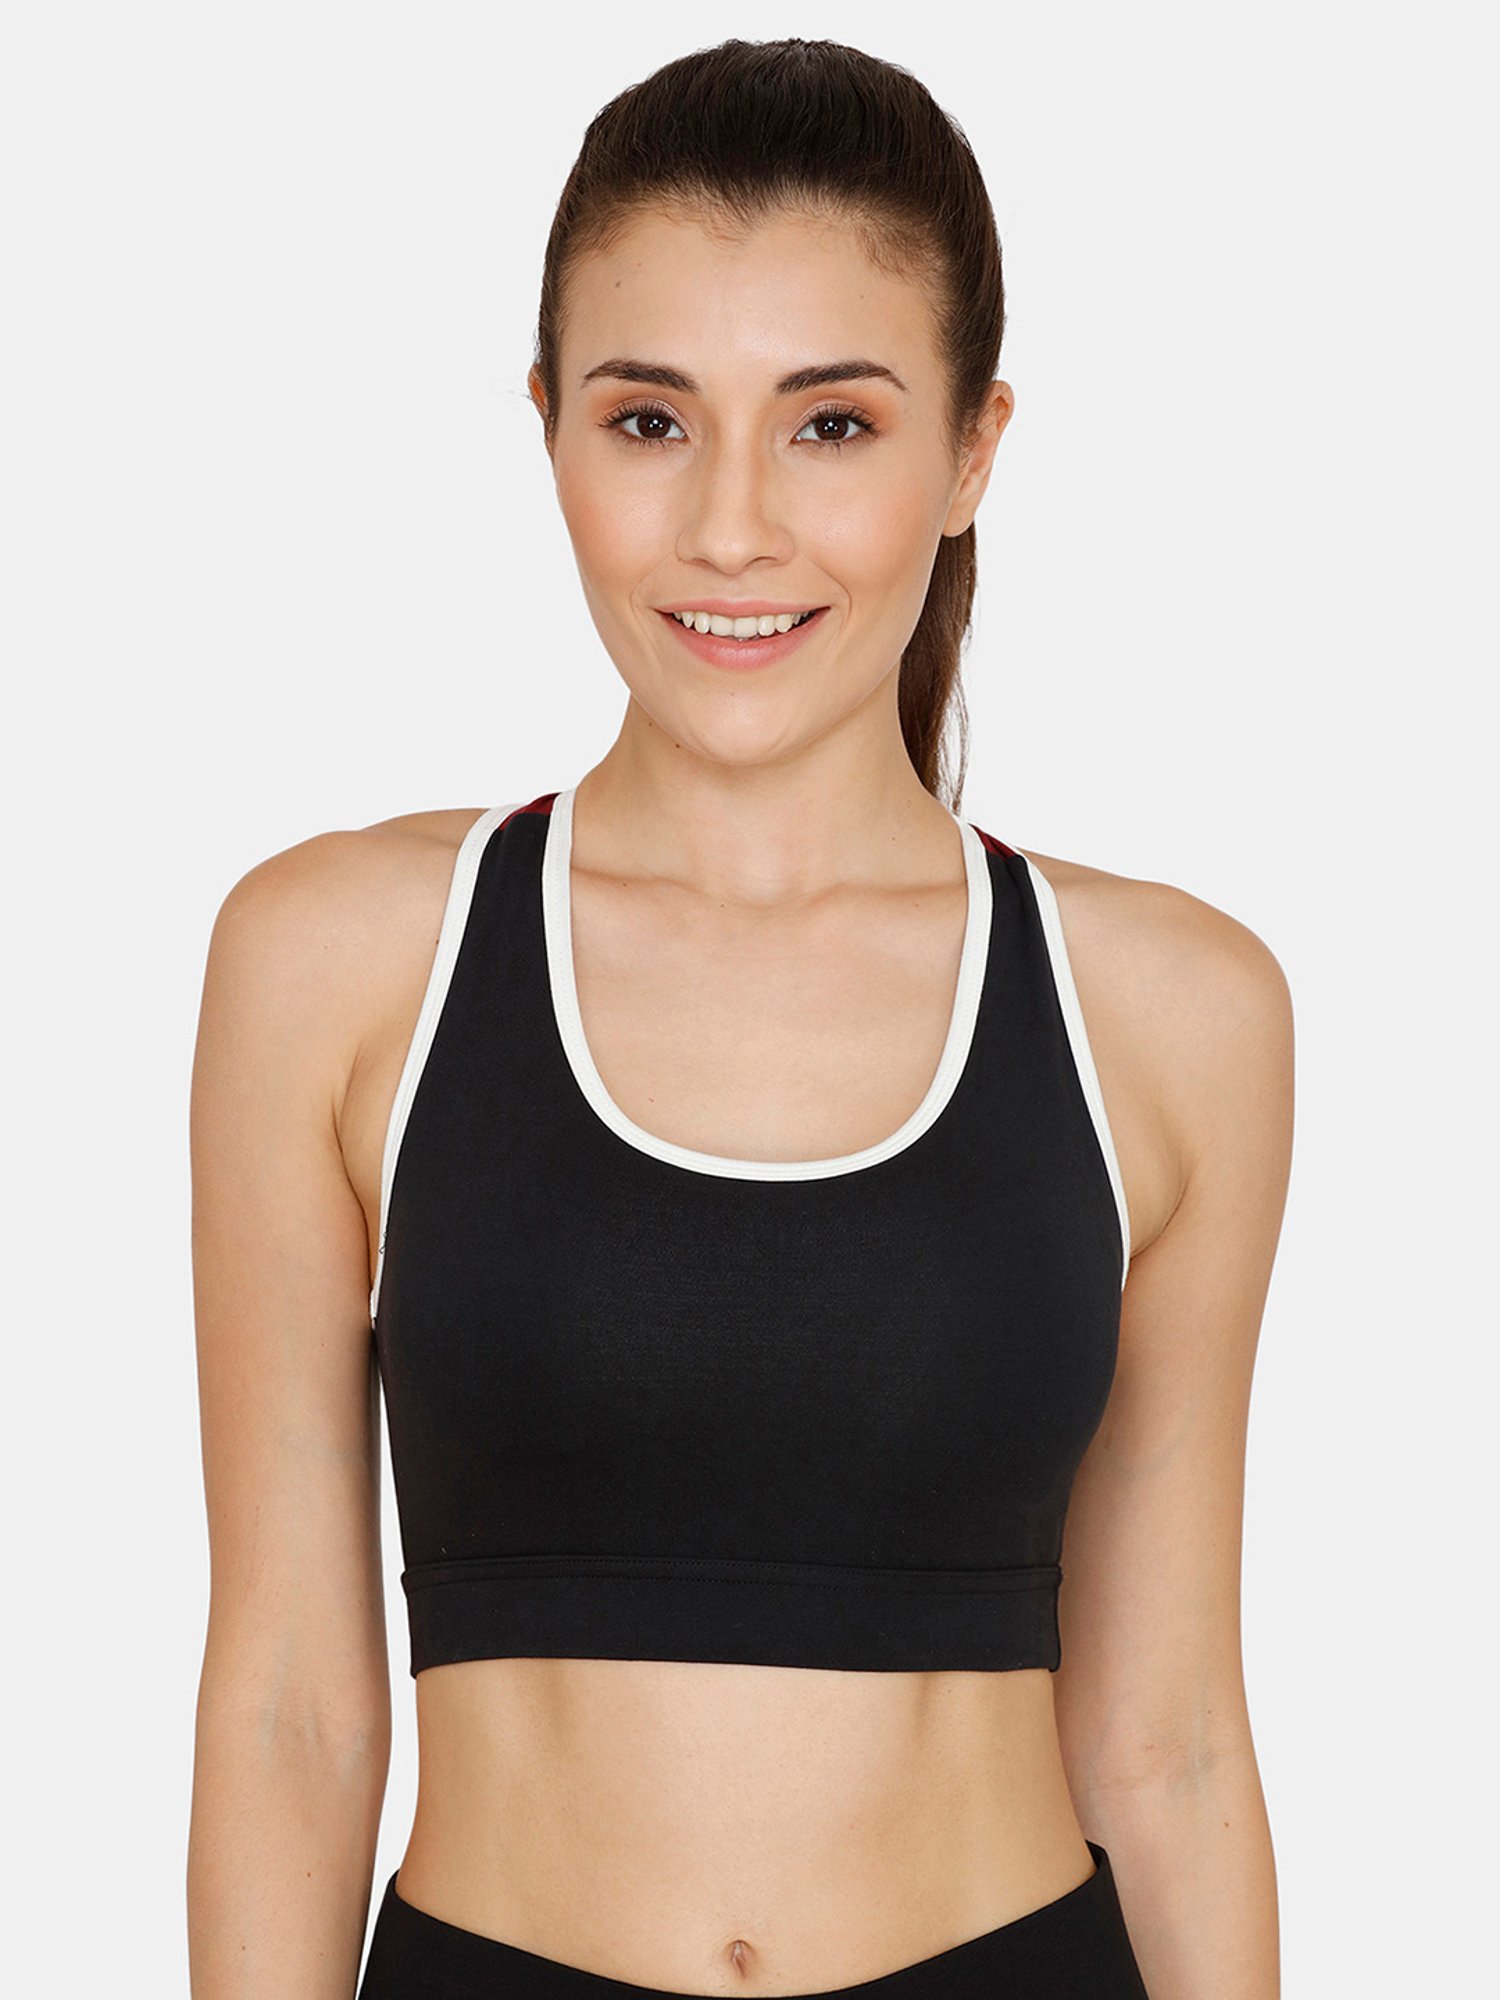 Buy Zivame Women's Rayon Full Cup Sports Bra (ZC4153-Anthracite_Black_32b)  at